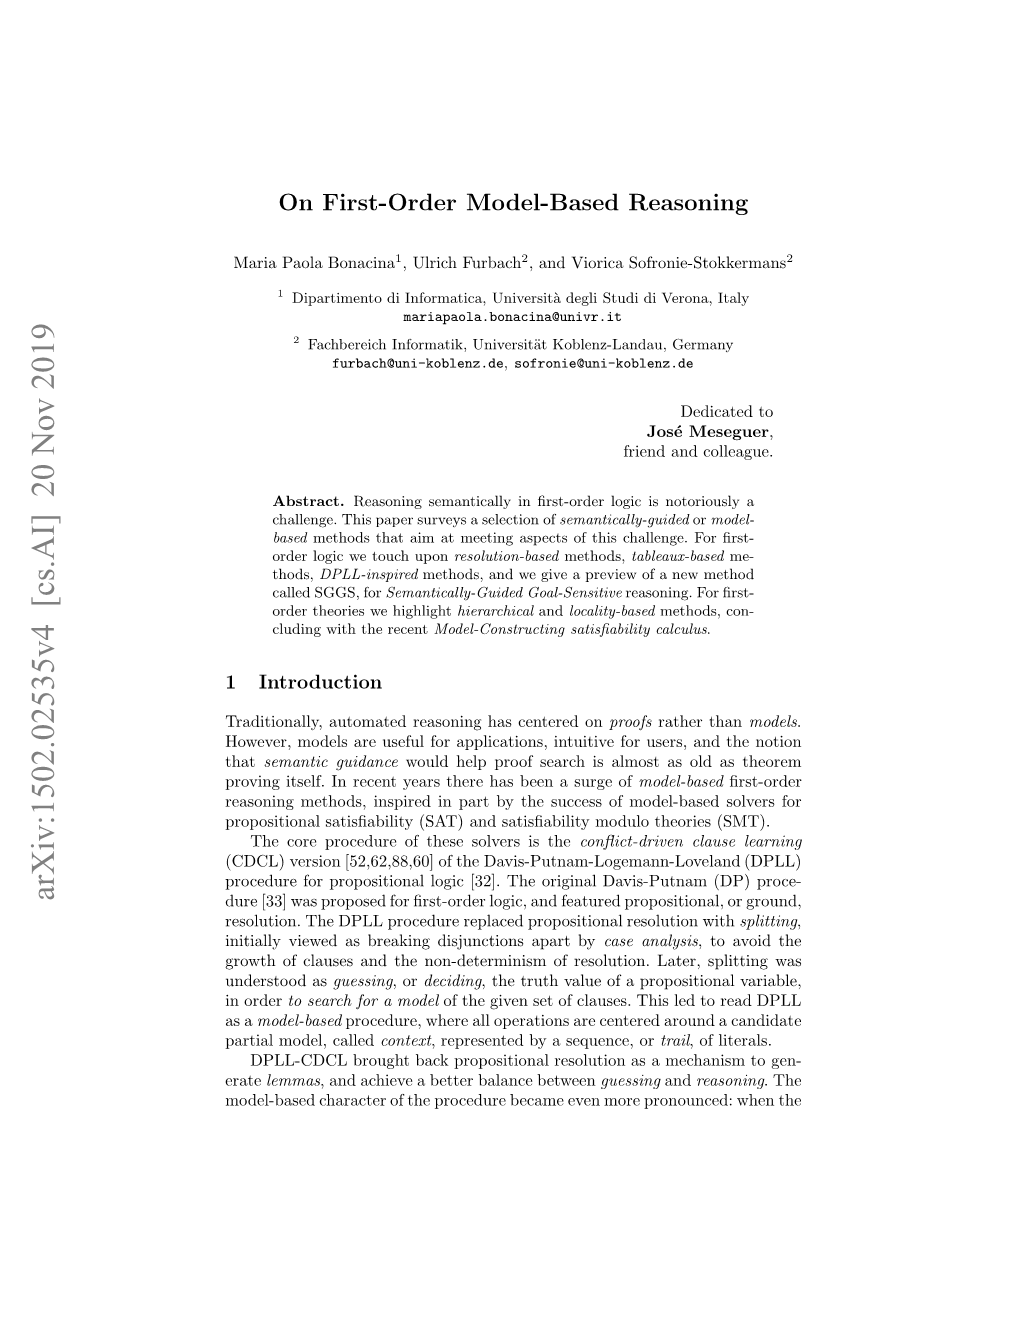 On First-Order Model-Based Reasoning